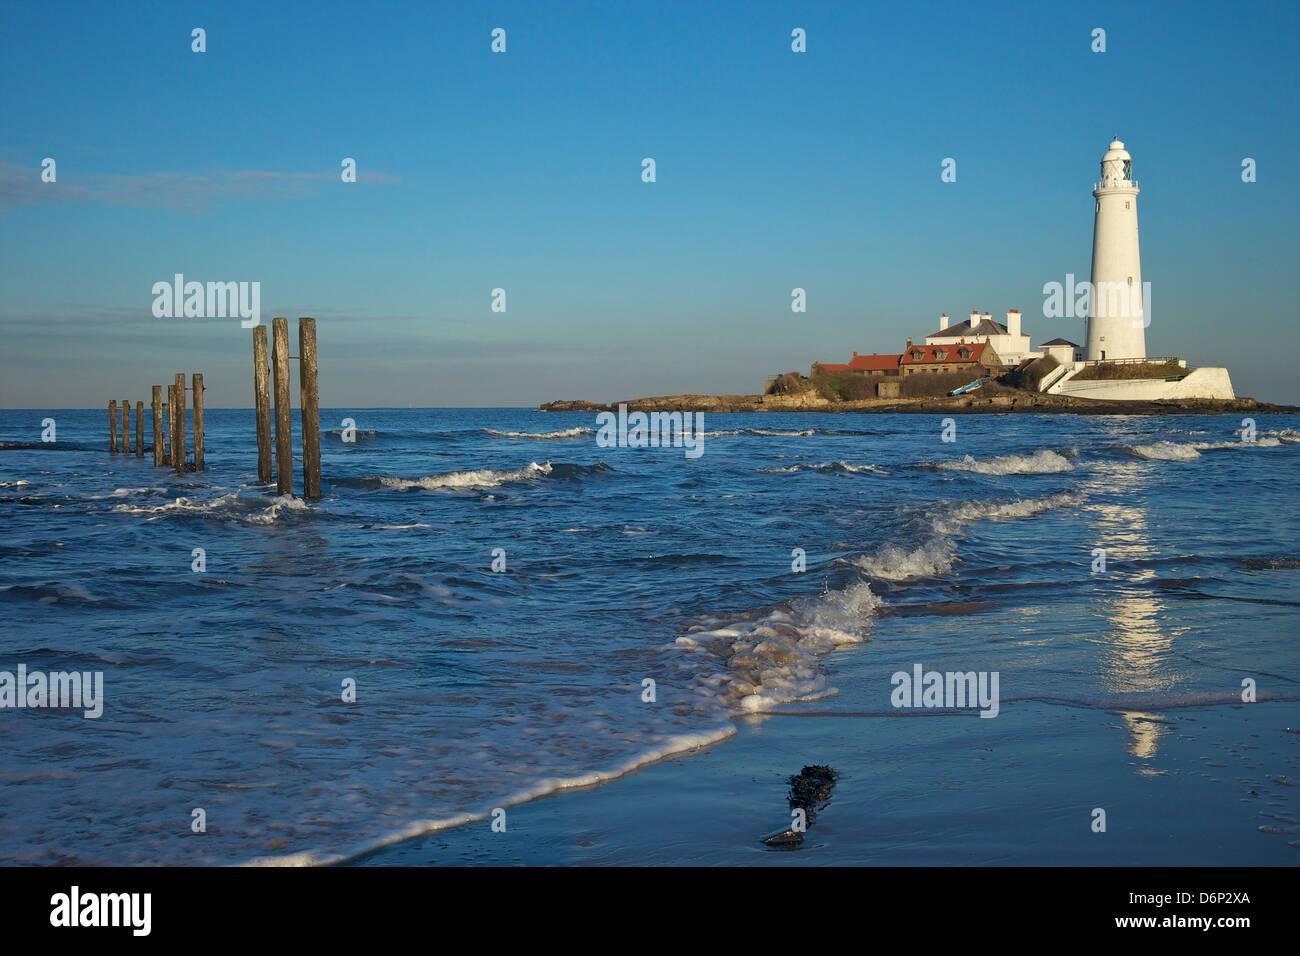 Le phare de St Marys, Whitley Bay, North Tyneside, Tyne et Wear, Angleterre, Royaume-Uni, Europe Banque D'Images